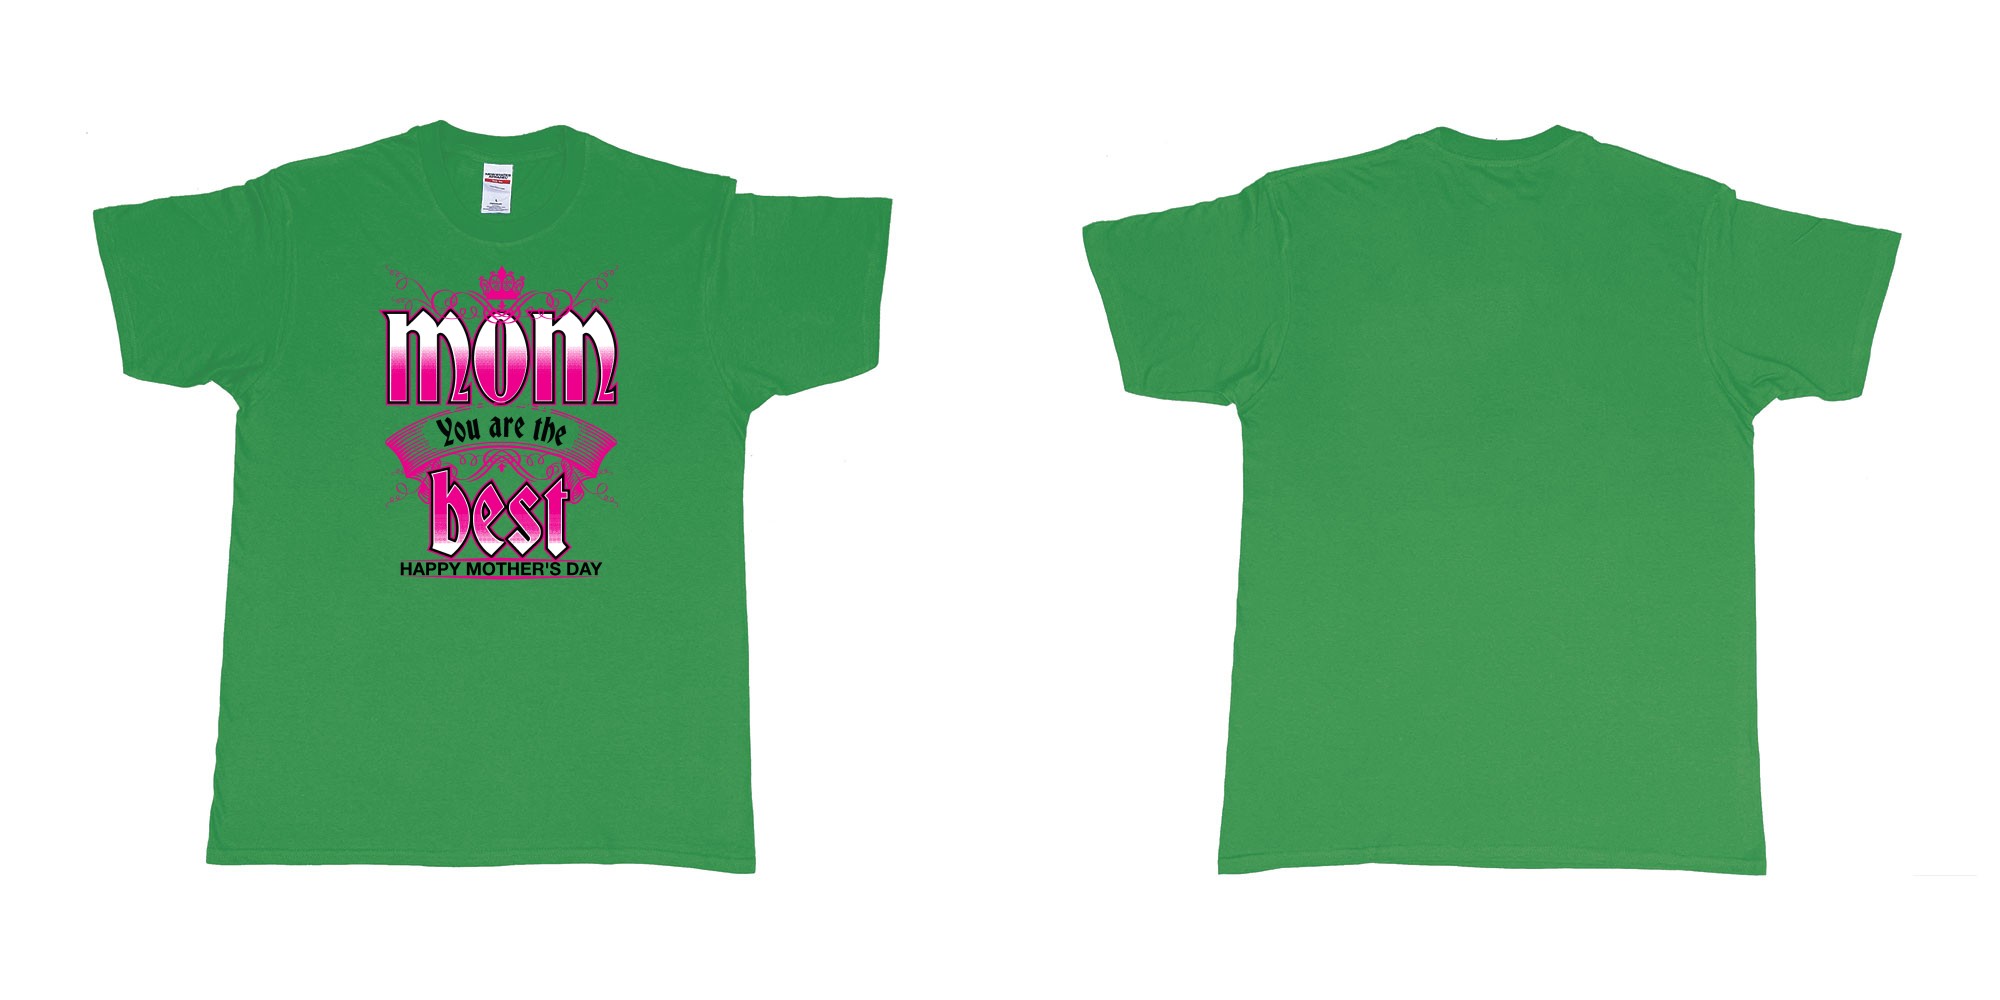 Custom tshirt design crown mom you are the best happy morthers day in fabric color irish-green choice your own text made in Bali by The Pirate Way